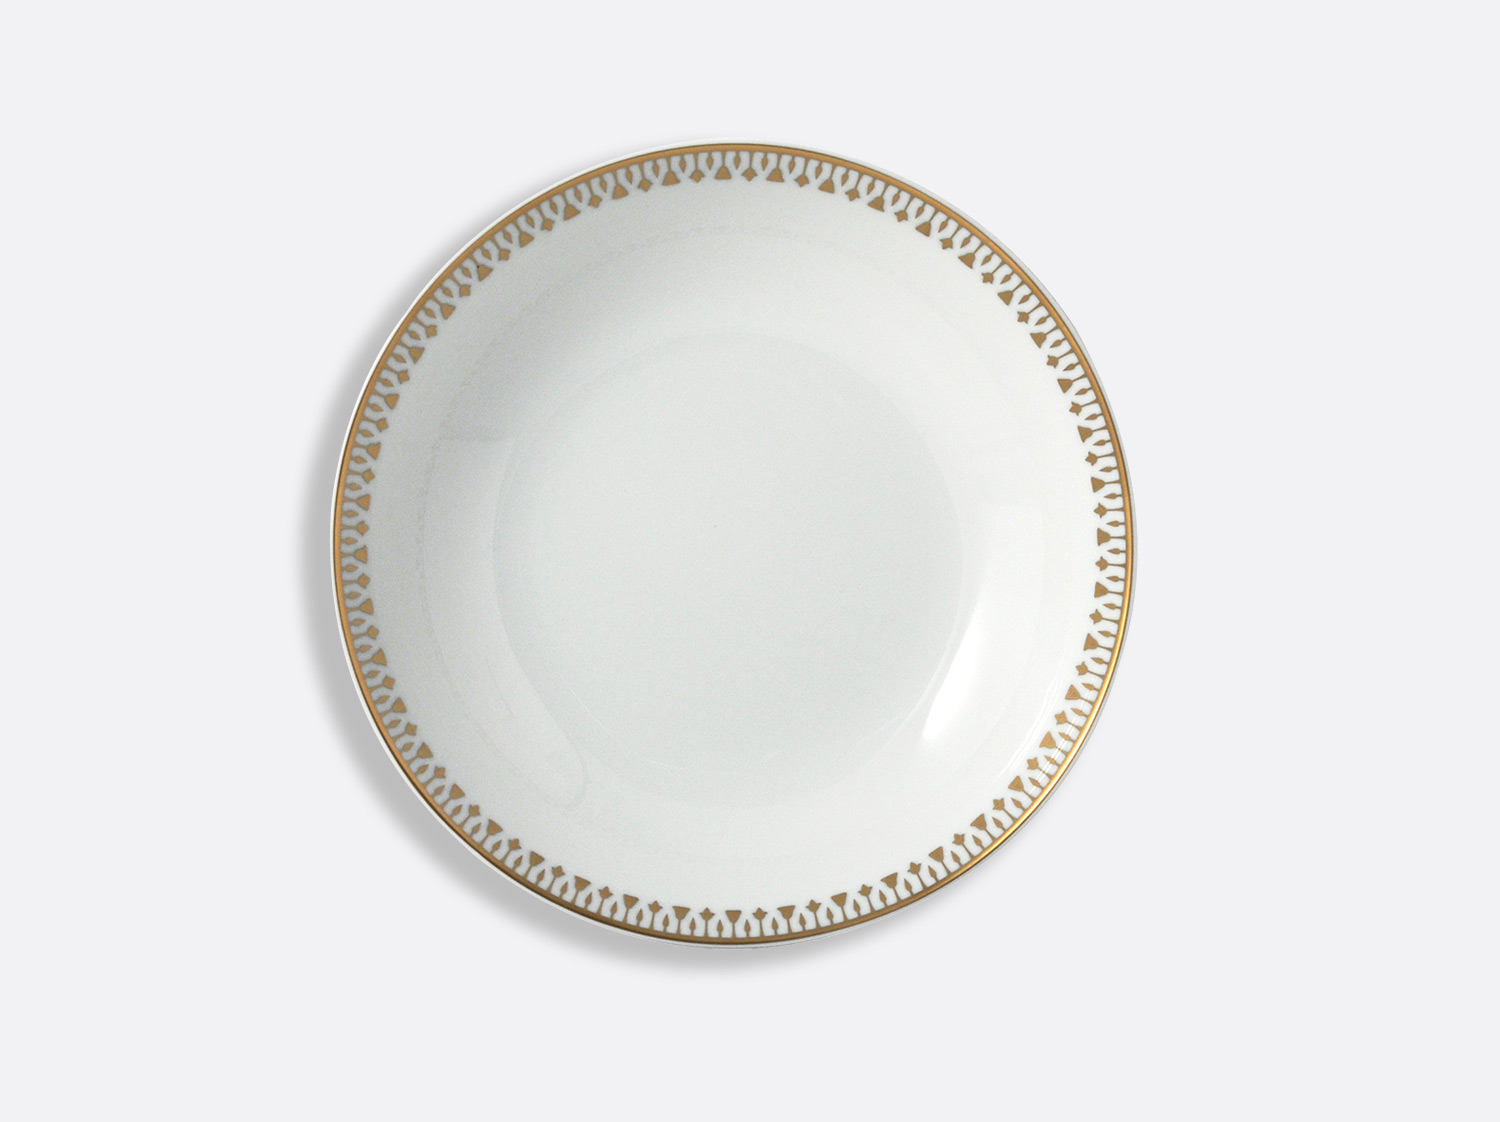 China coupe soup 19 cm of the collection Soleil levant | Bernardaud